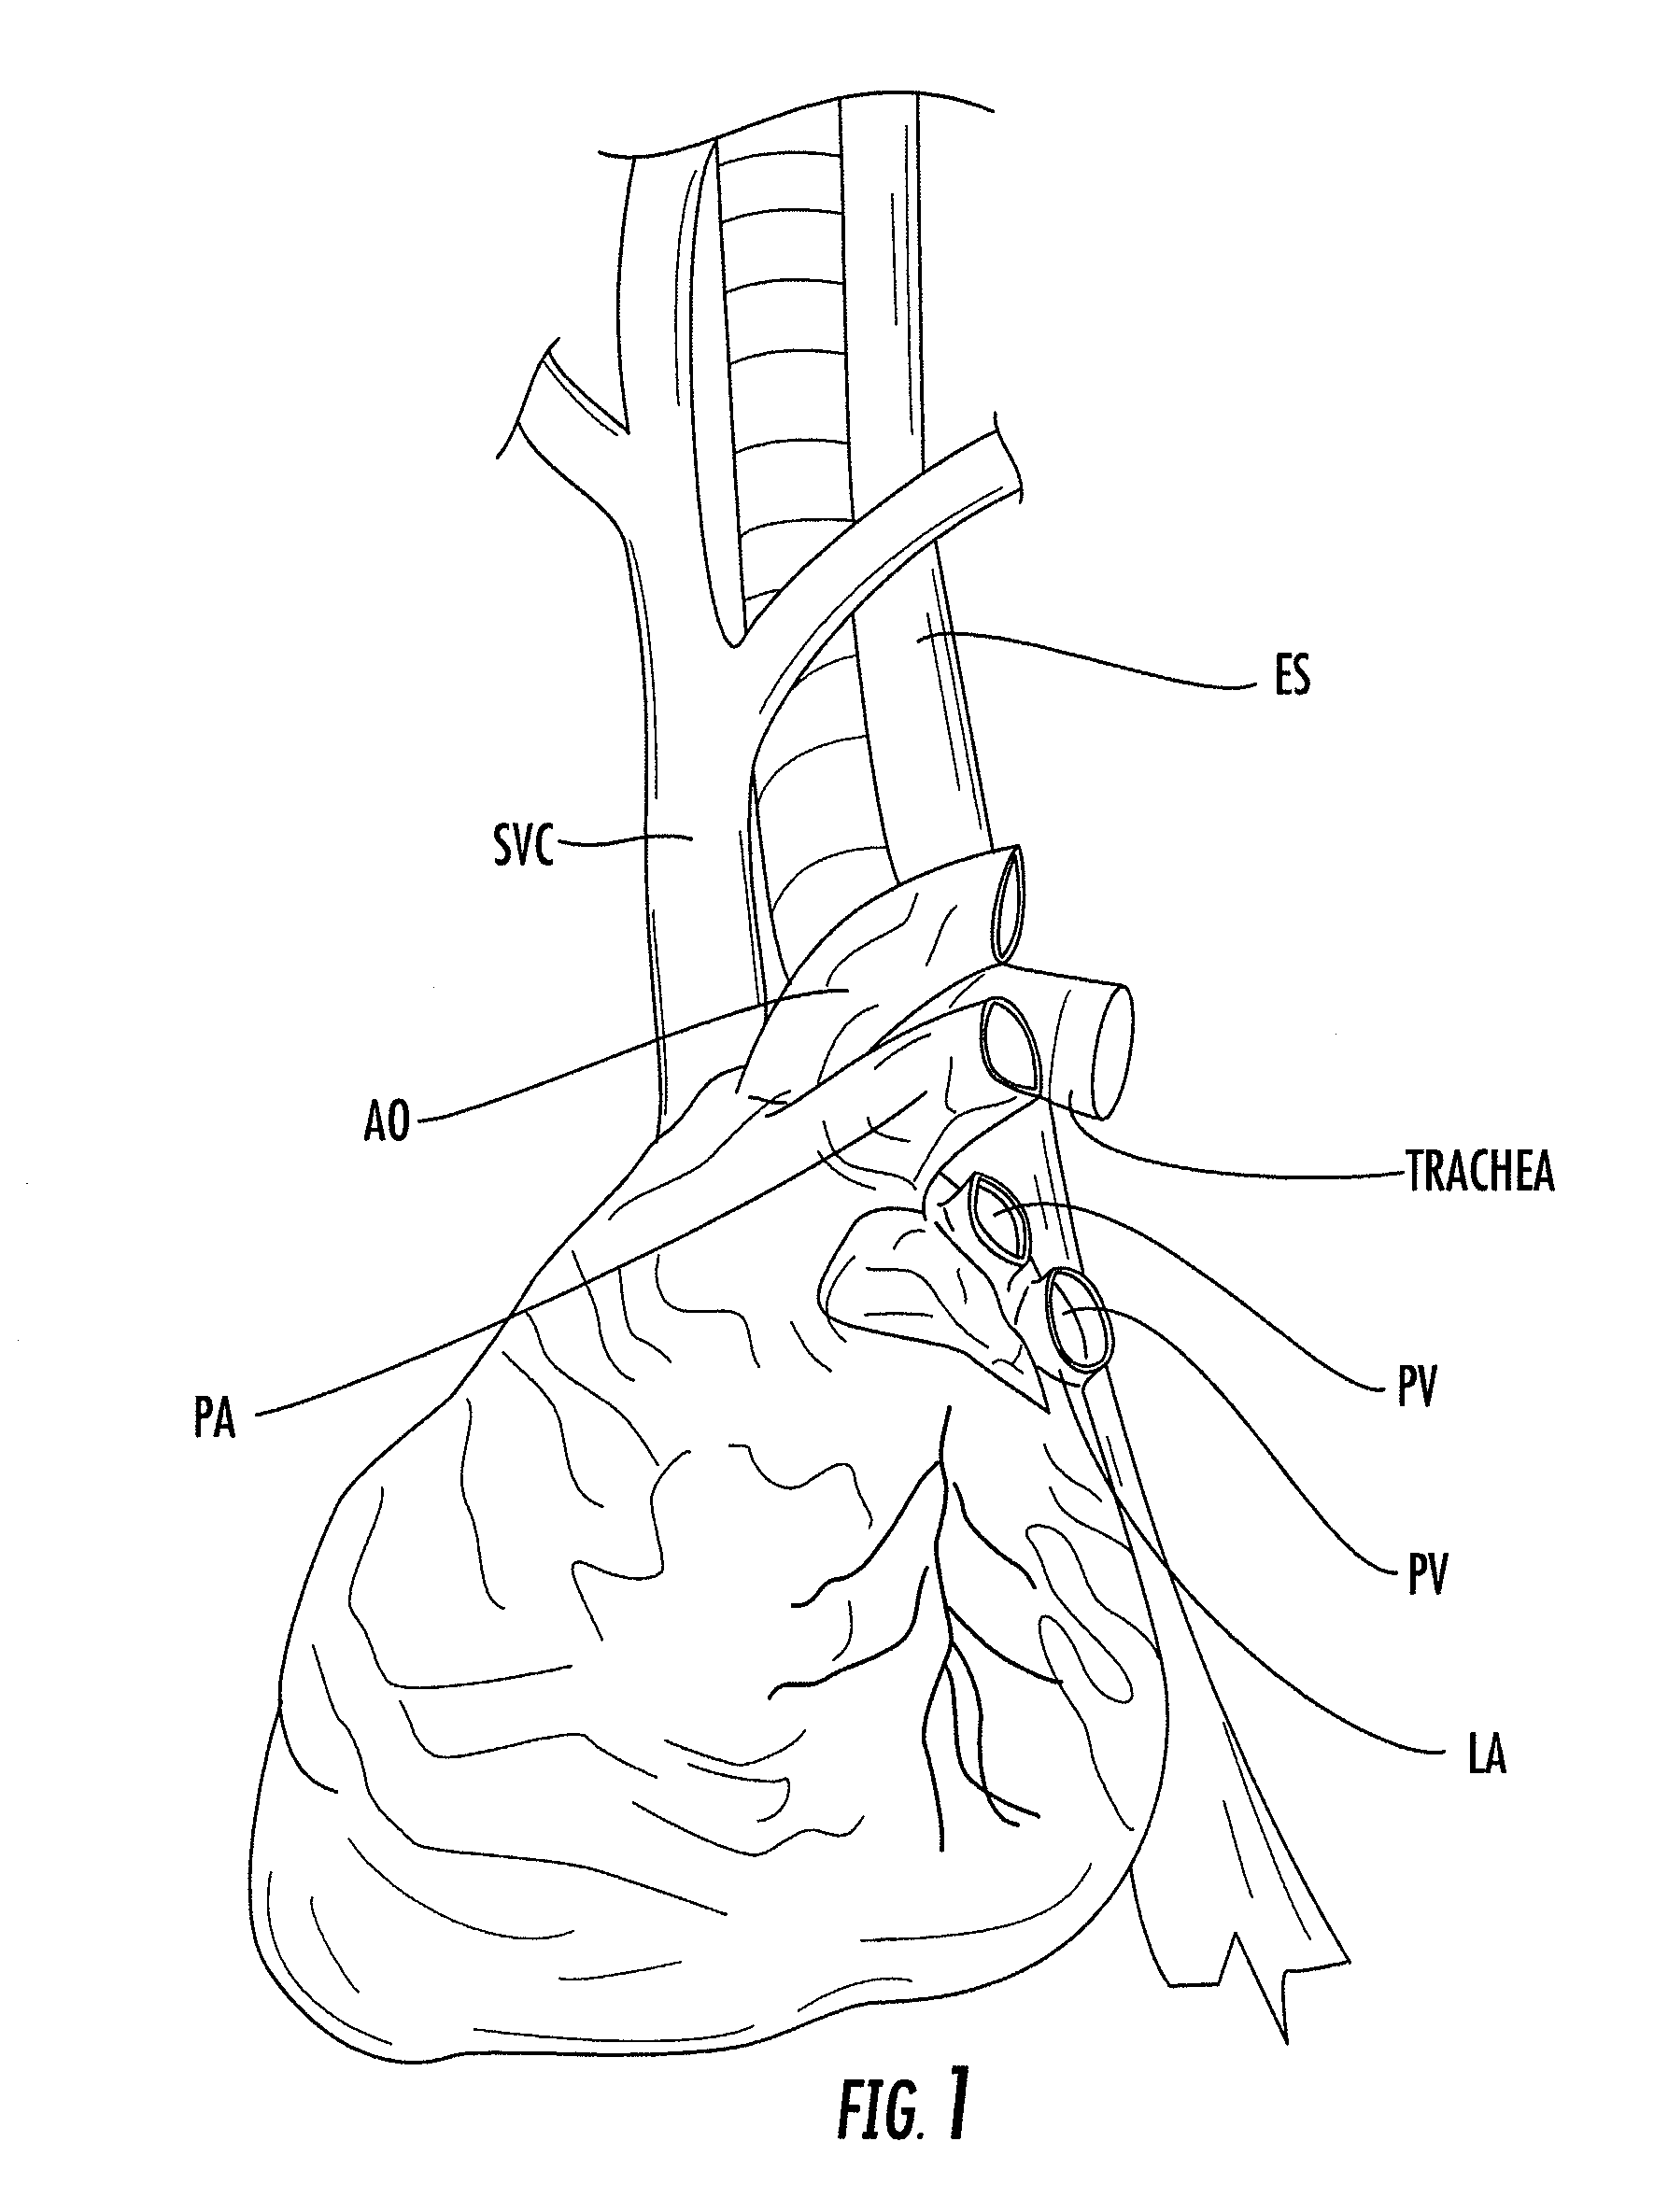 Nasogastric tube for use during an ablation procedure